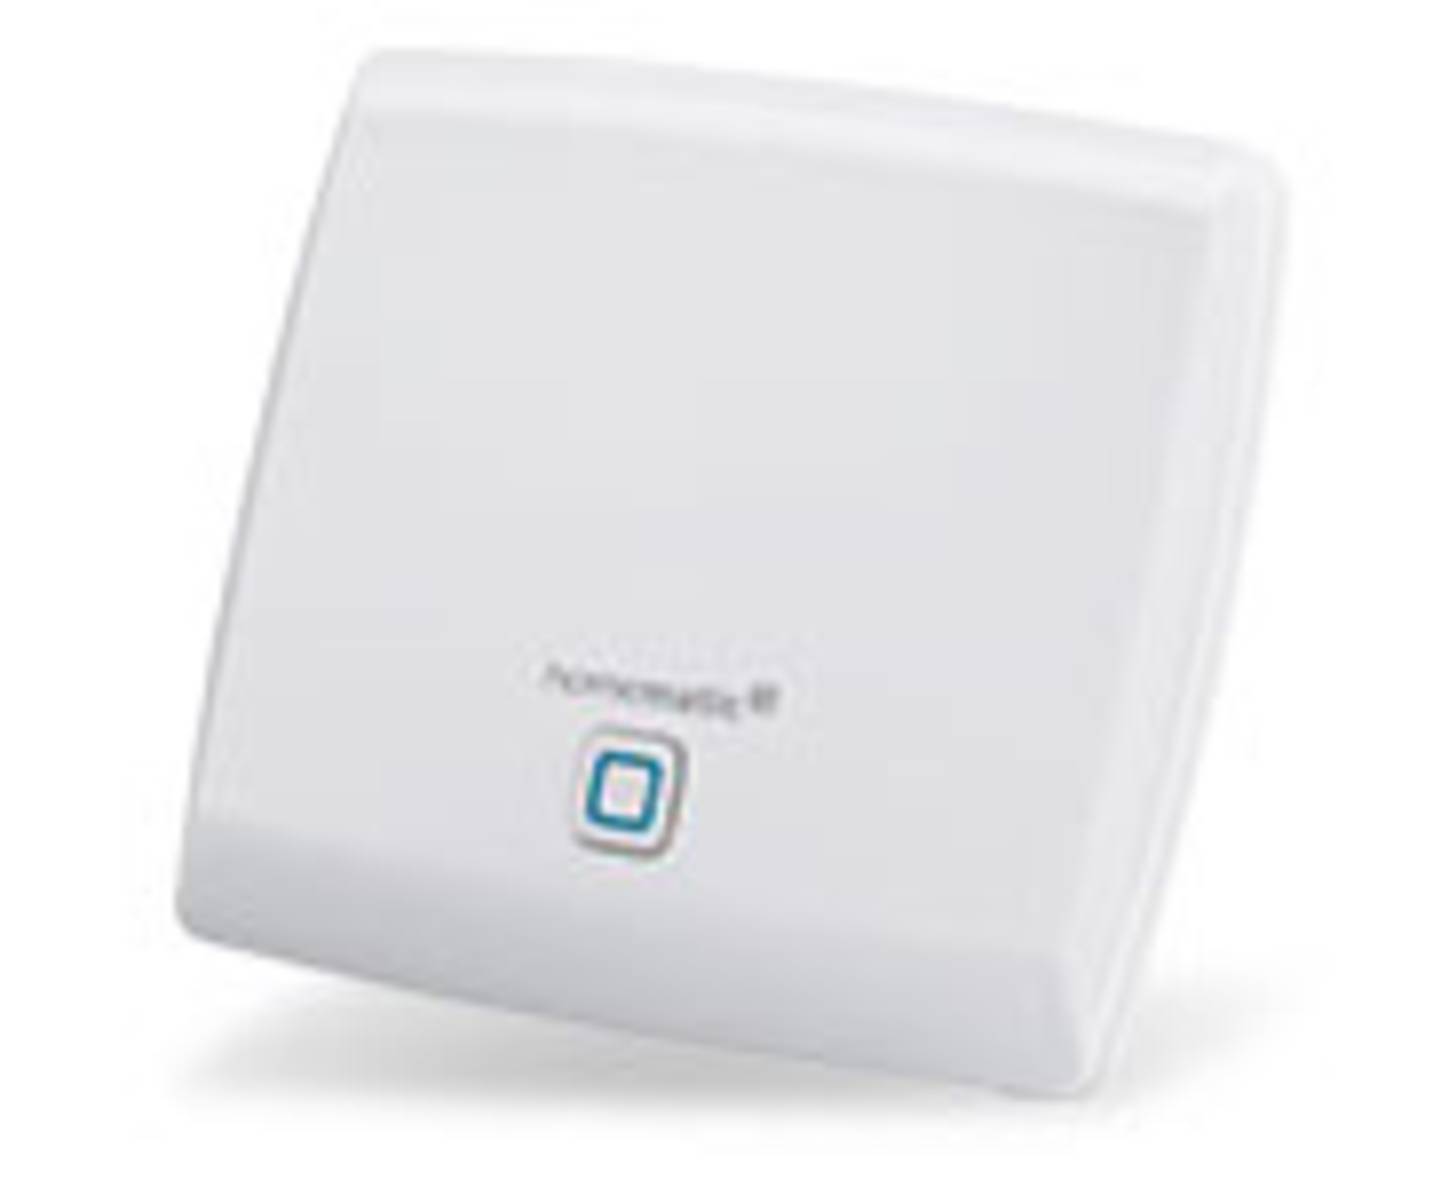 Homematic IP Access Point